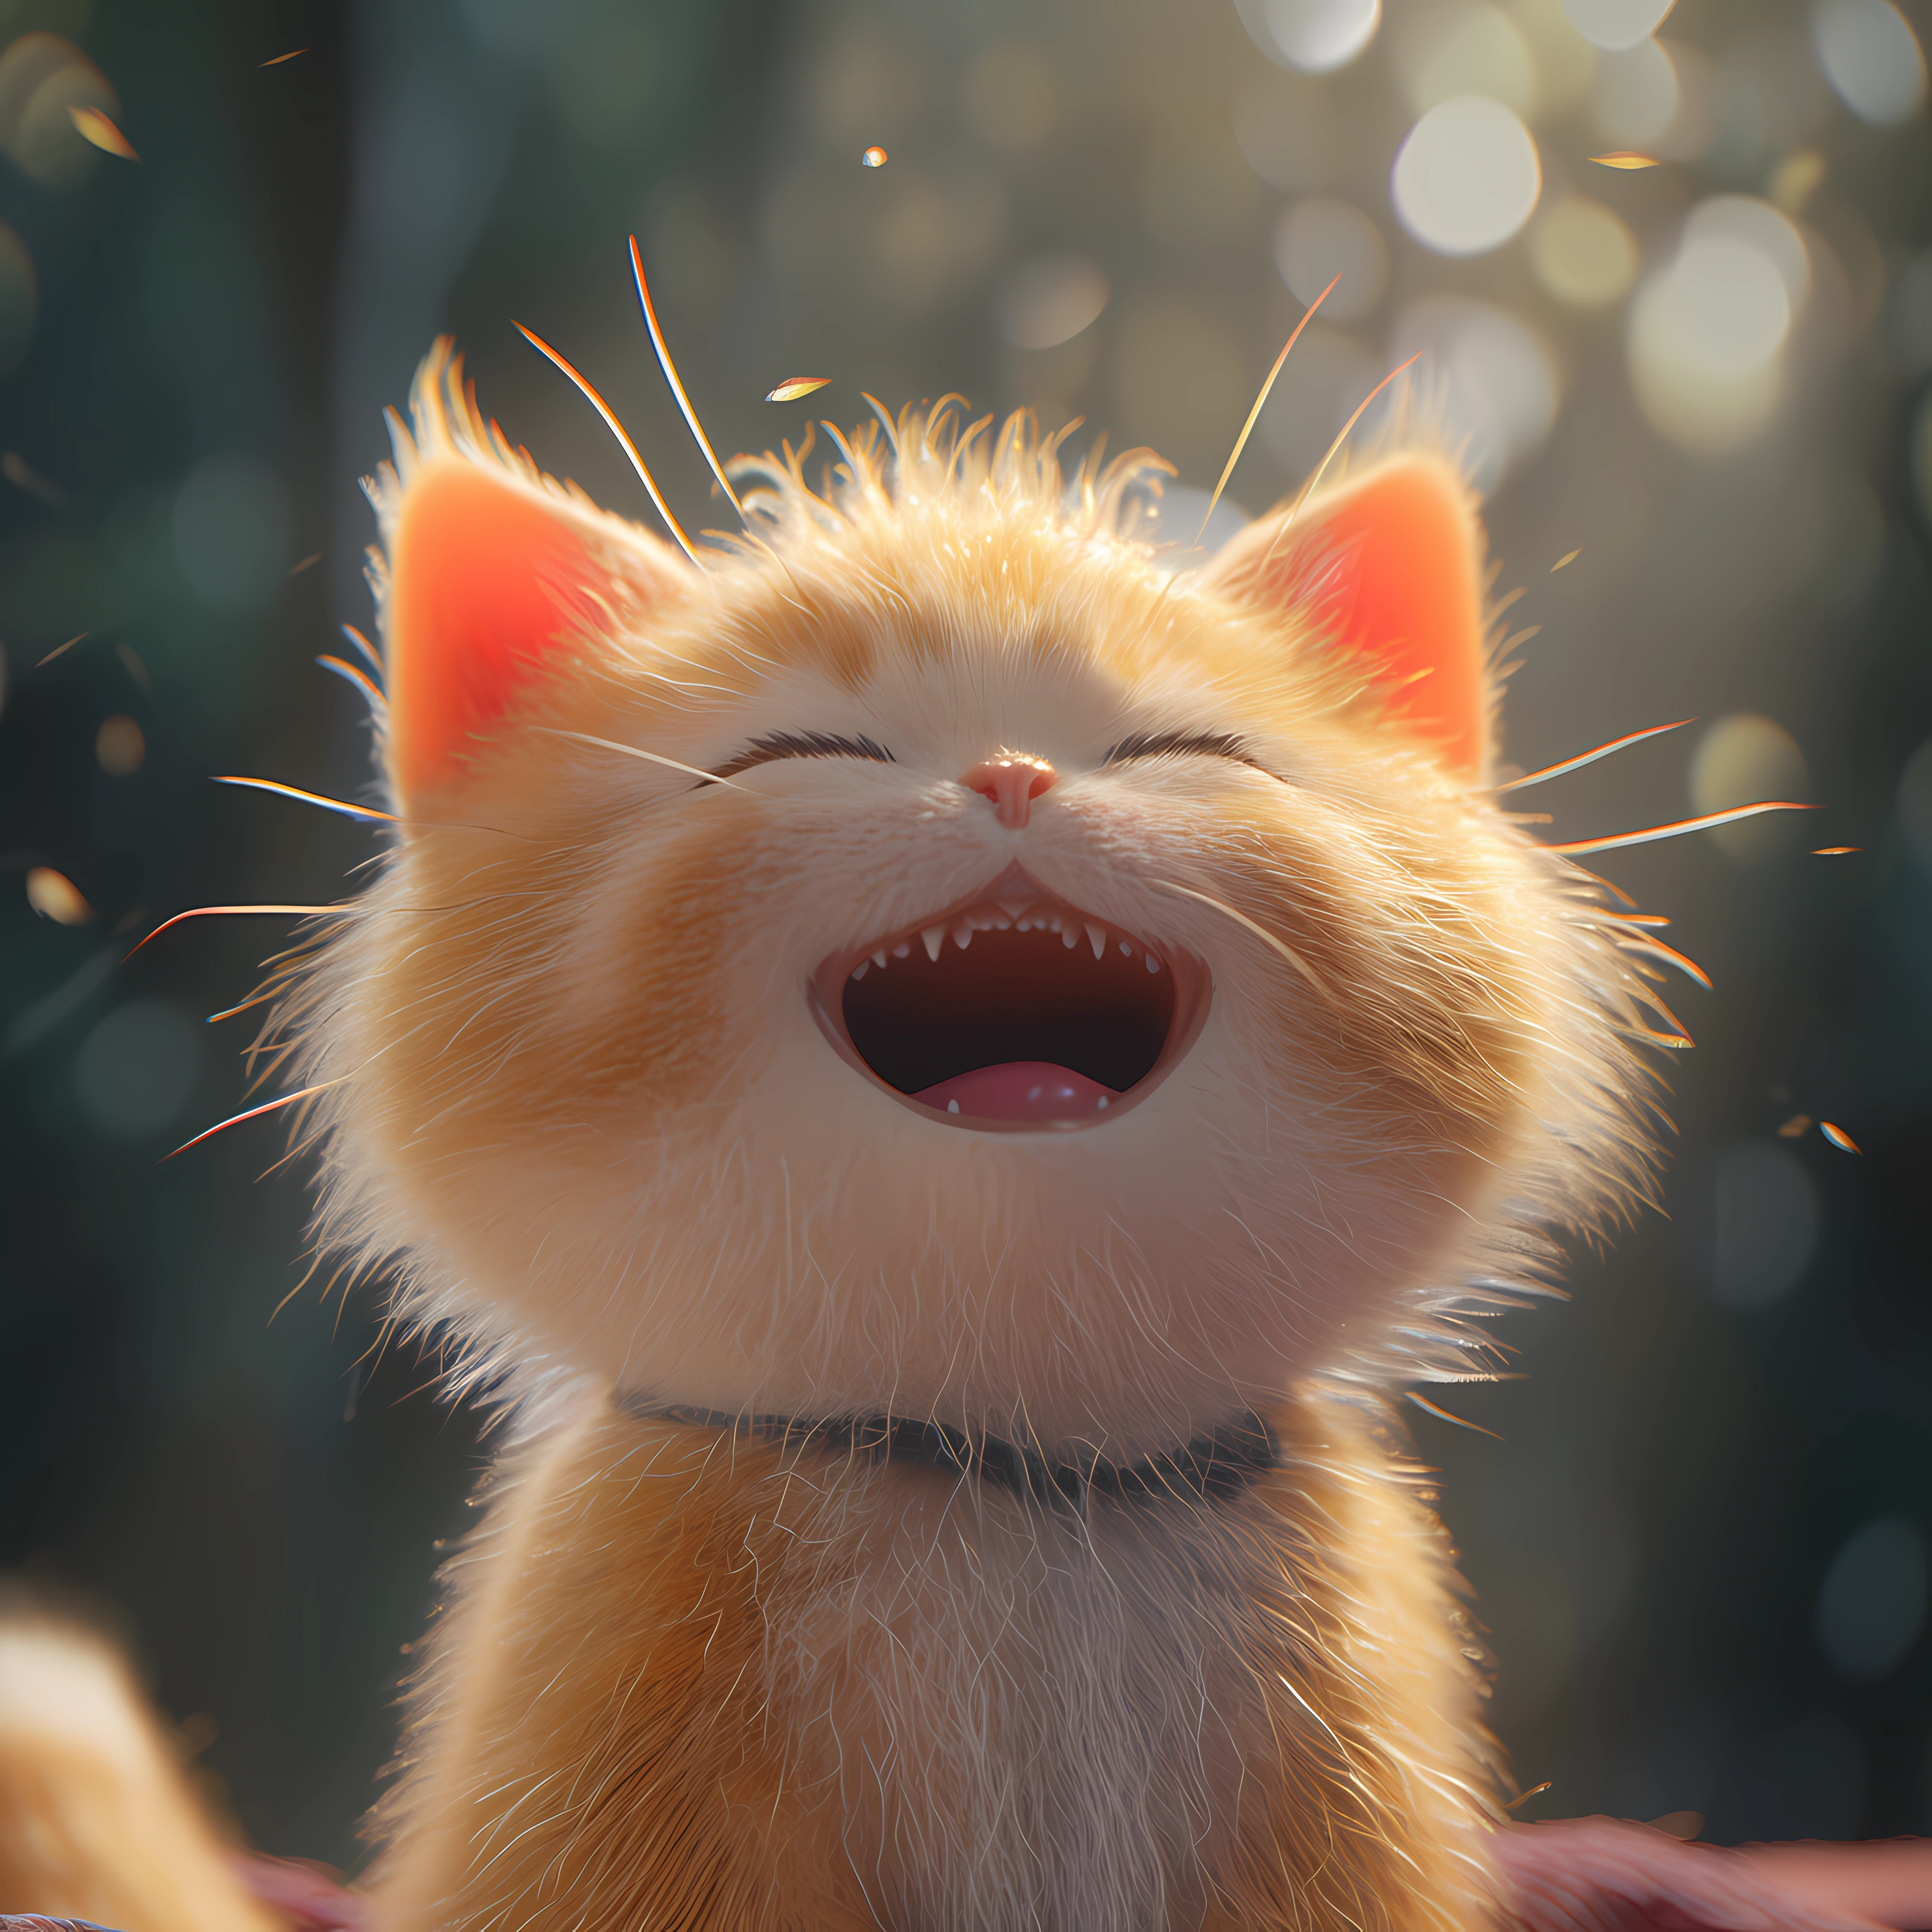 Joyful orange kitten avatar image showing a happy cat with a beaming smile, radiating cuteness and happiness.